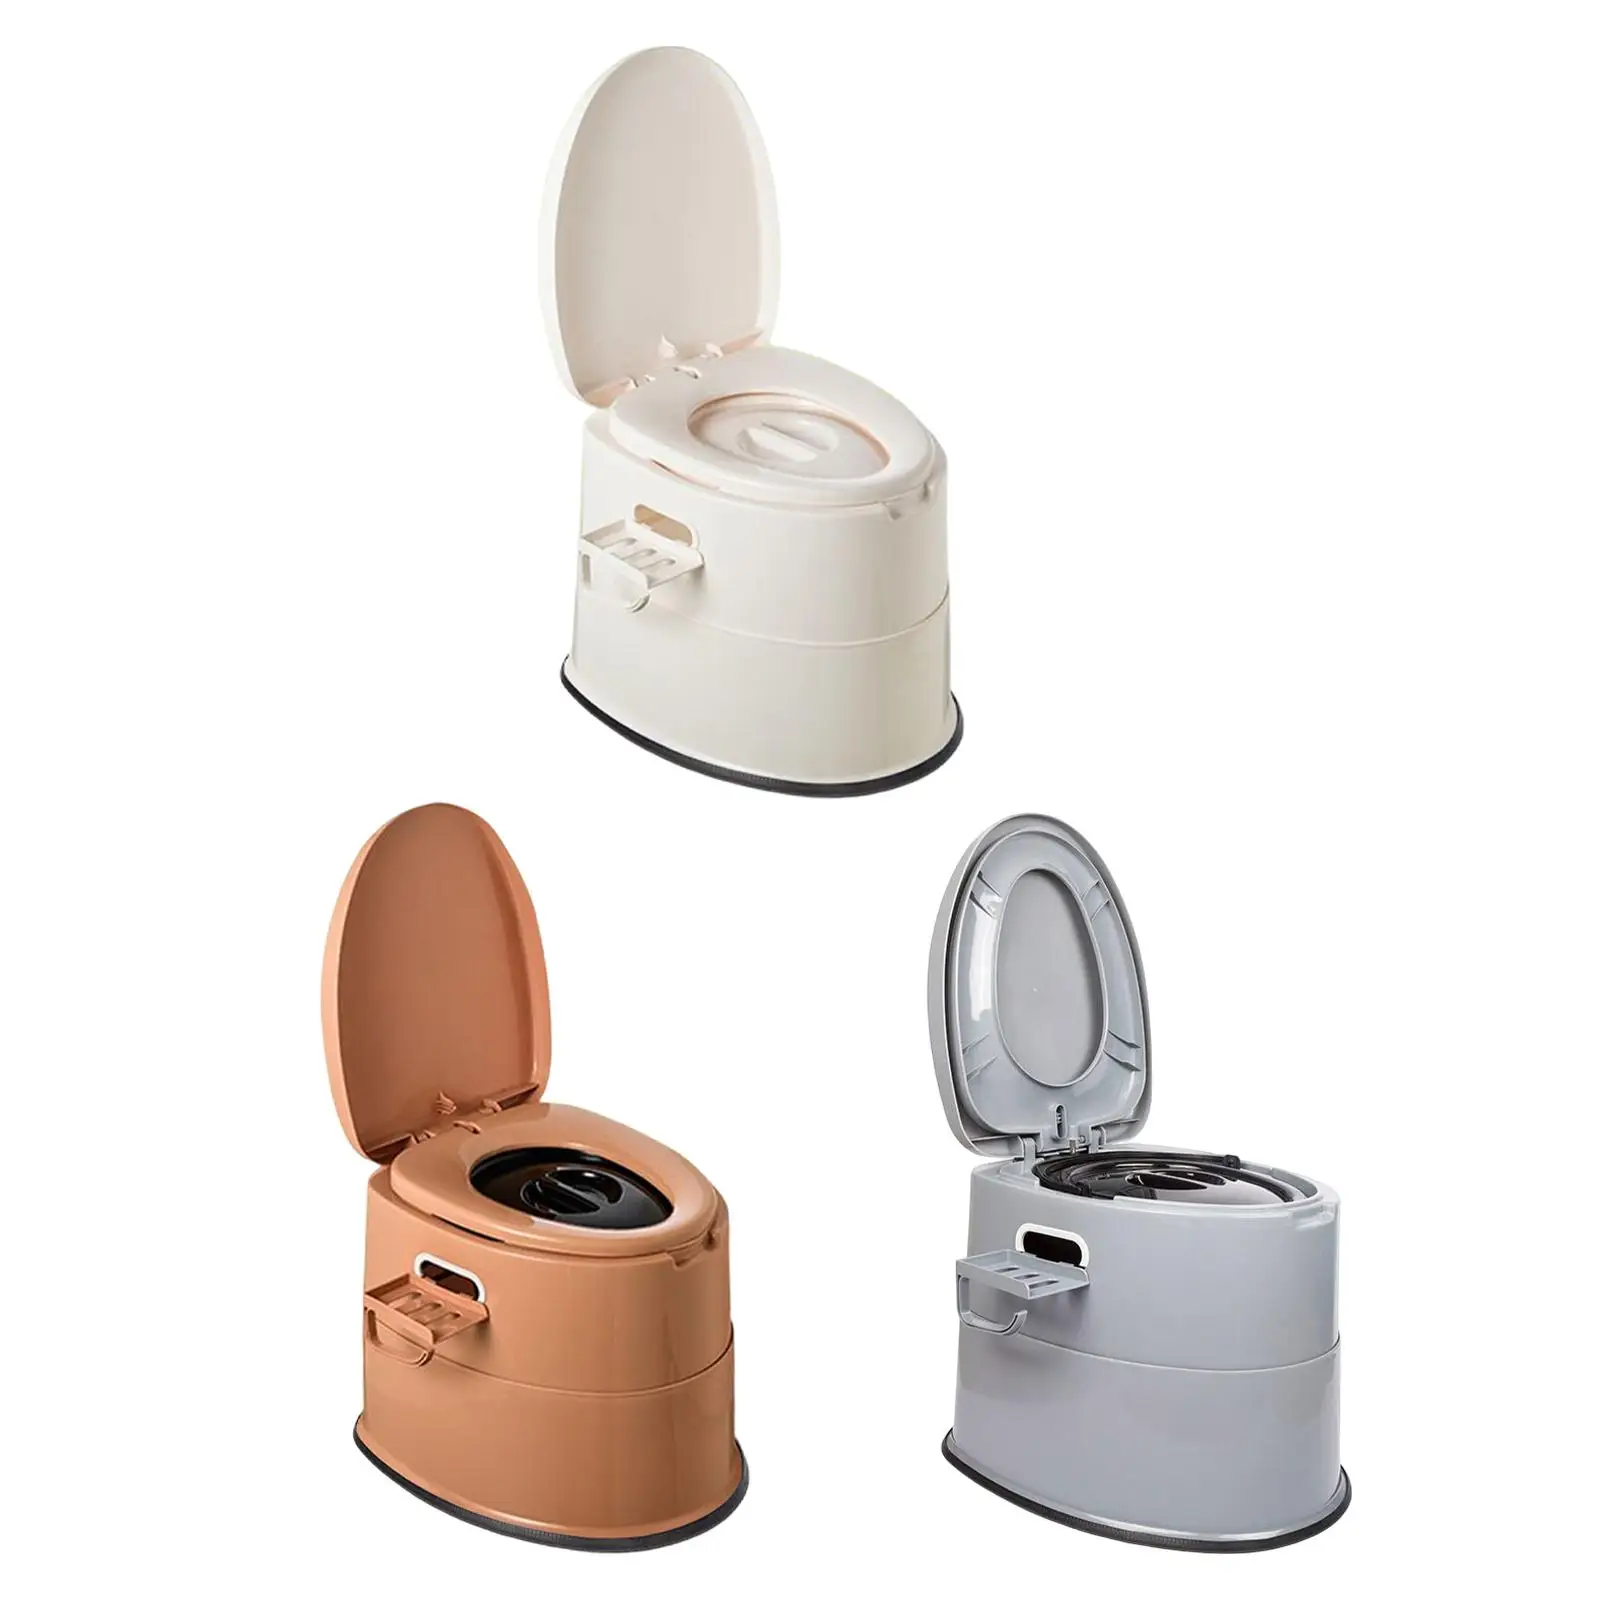 Outdoor Potty Waterproof Detachable Inner Bucket with Lid Sturdy Portable Toilet for Indoor Boat Hiking Trips Outdoor